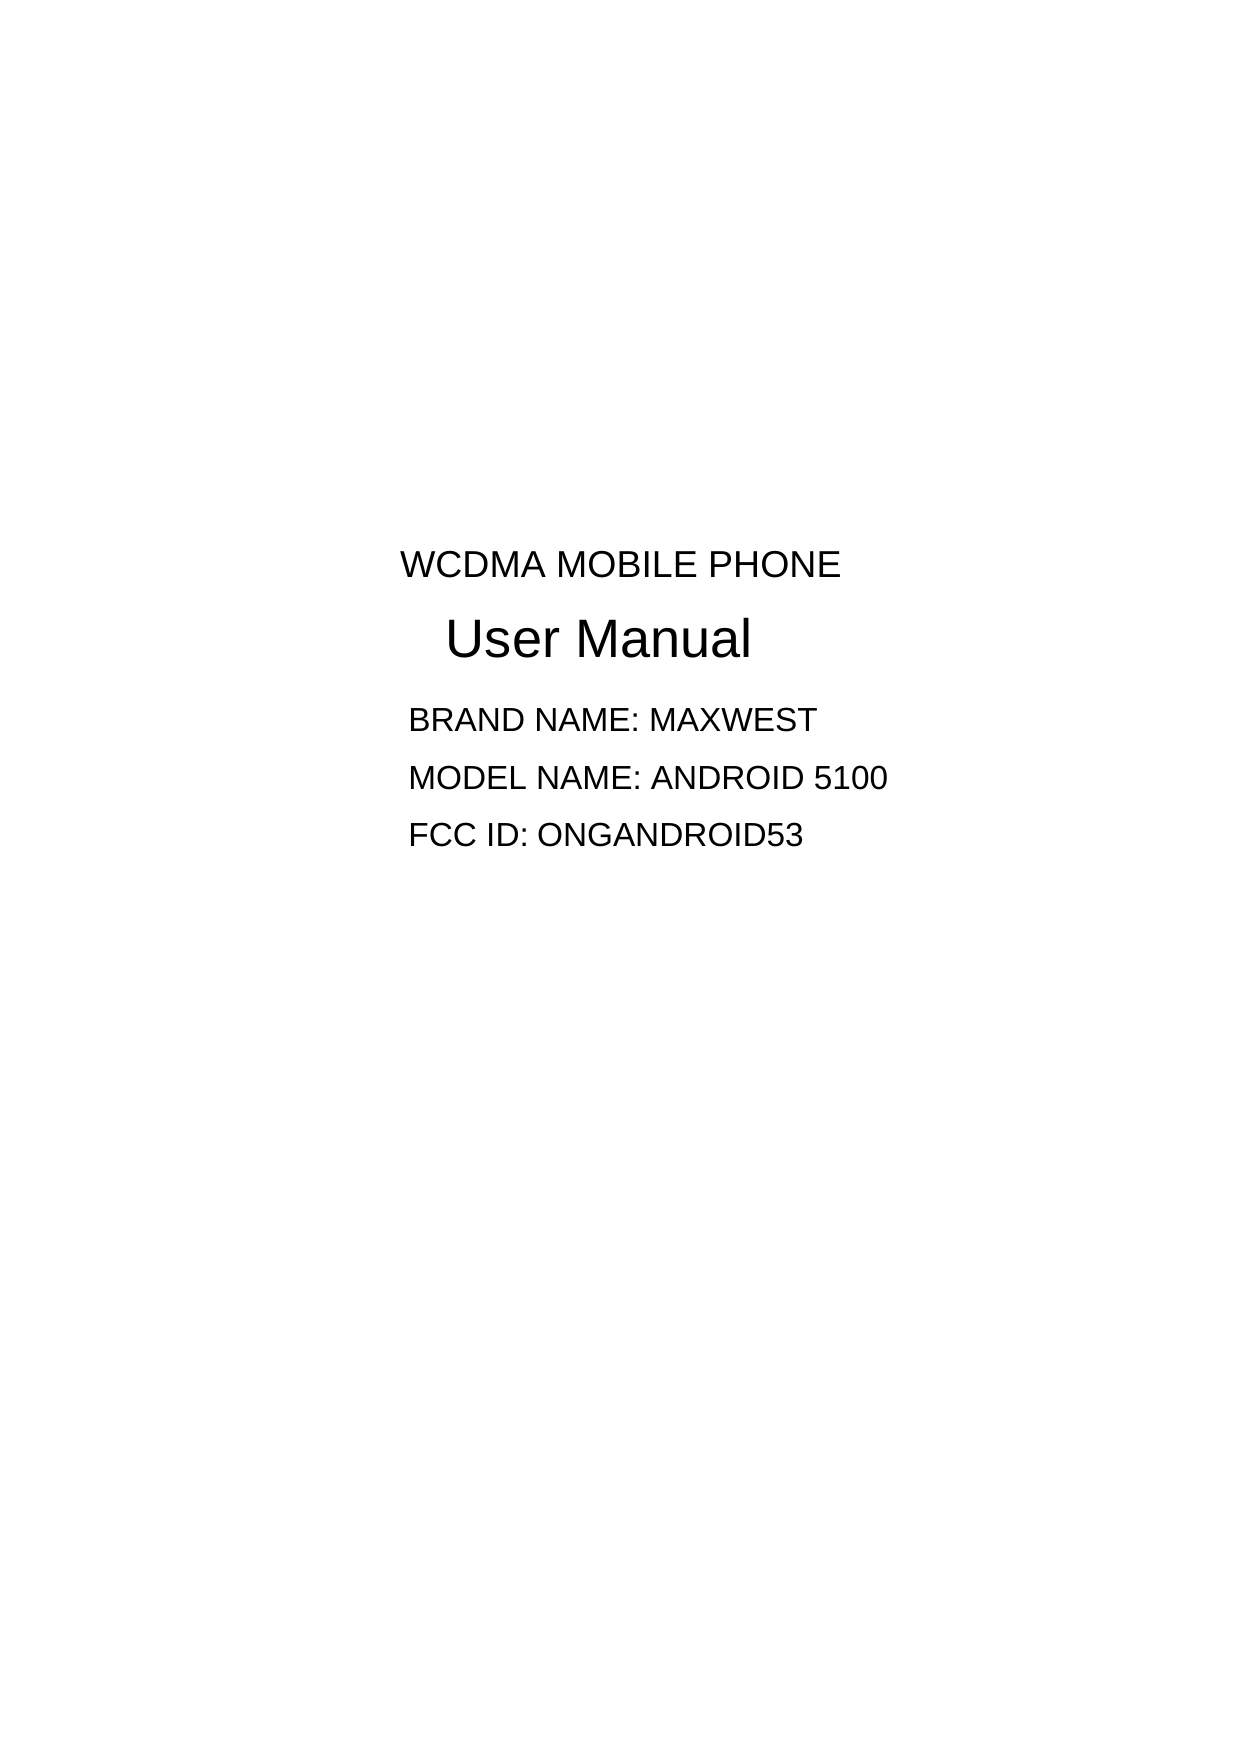                  WCDMA MOBILE PHONE User Manual BRAND NAME: MAXWEST MODEL NAME: ANDROID 5100 FCC ID: ONGANDROID53 